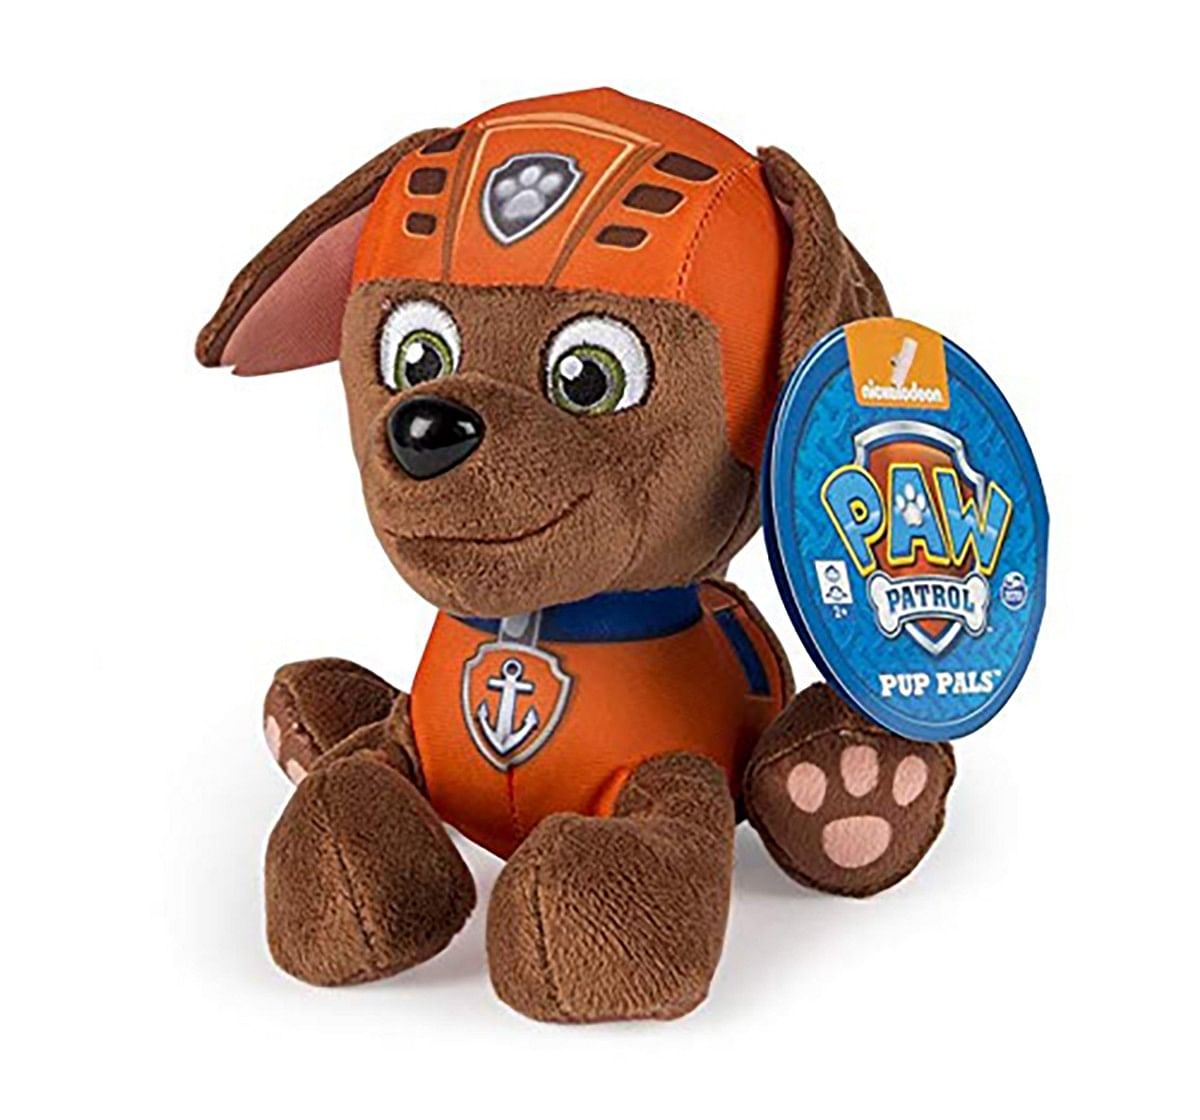 Paw Patrol Basic Plush Asstorted Character Soft Toys for Kids age 3Y+ - 14.1478 Cm 